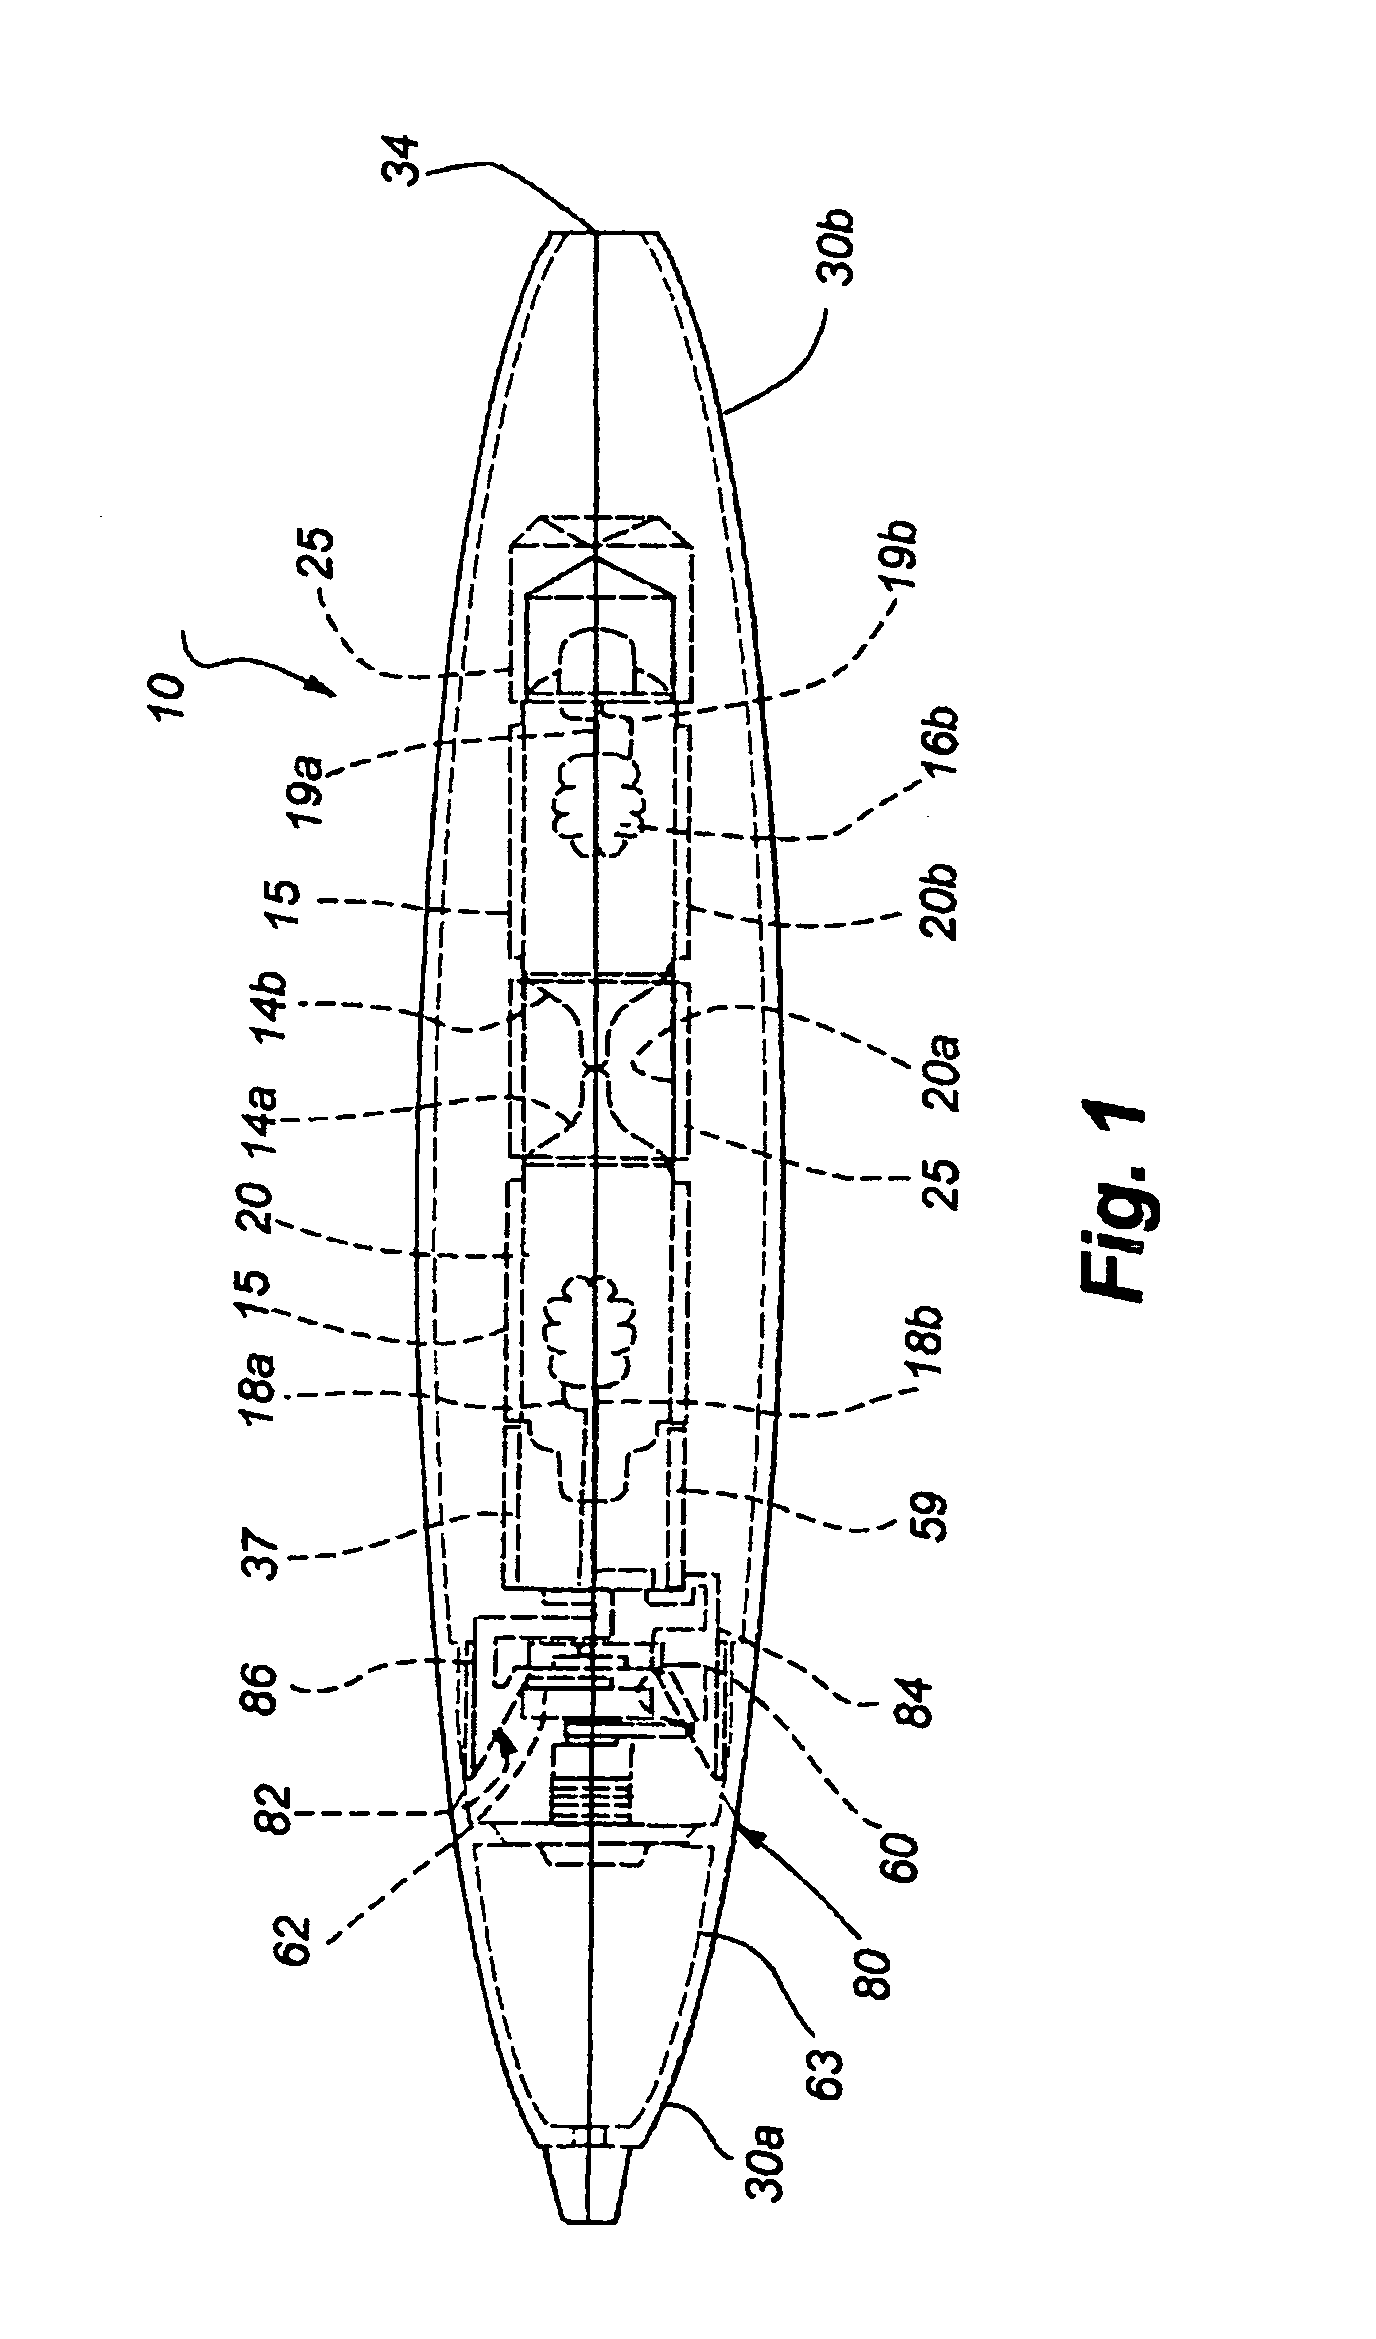 Method and apparatus for vaporizing a compound